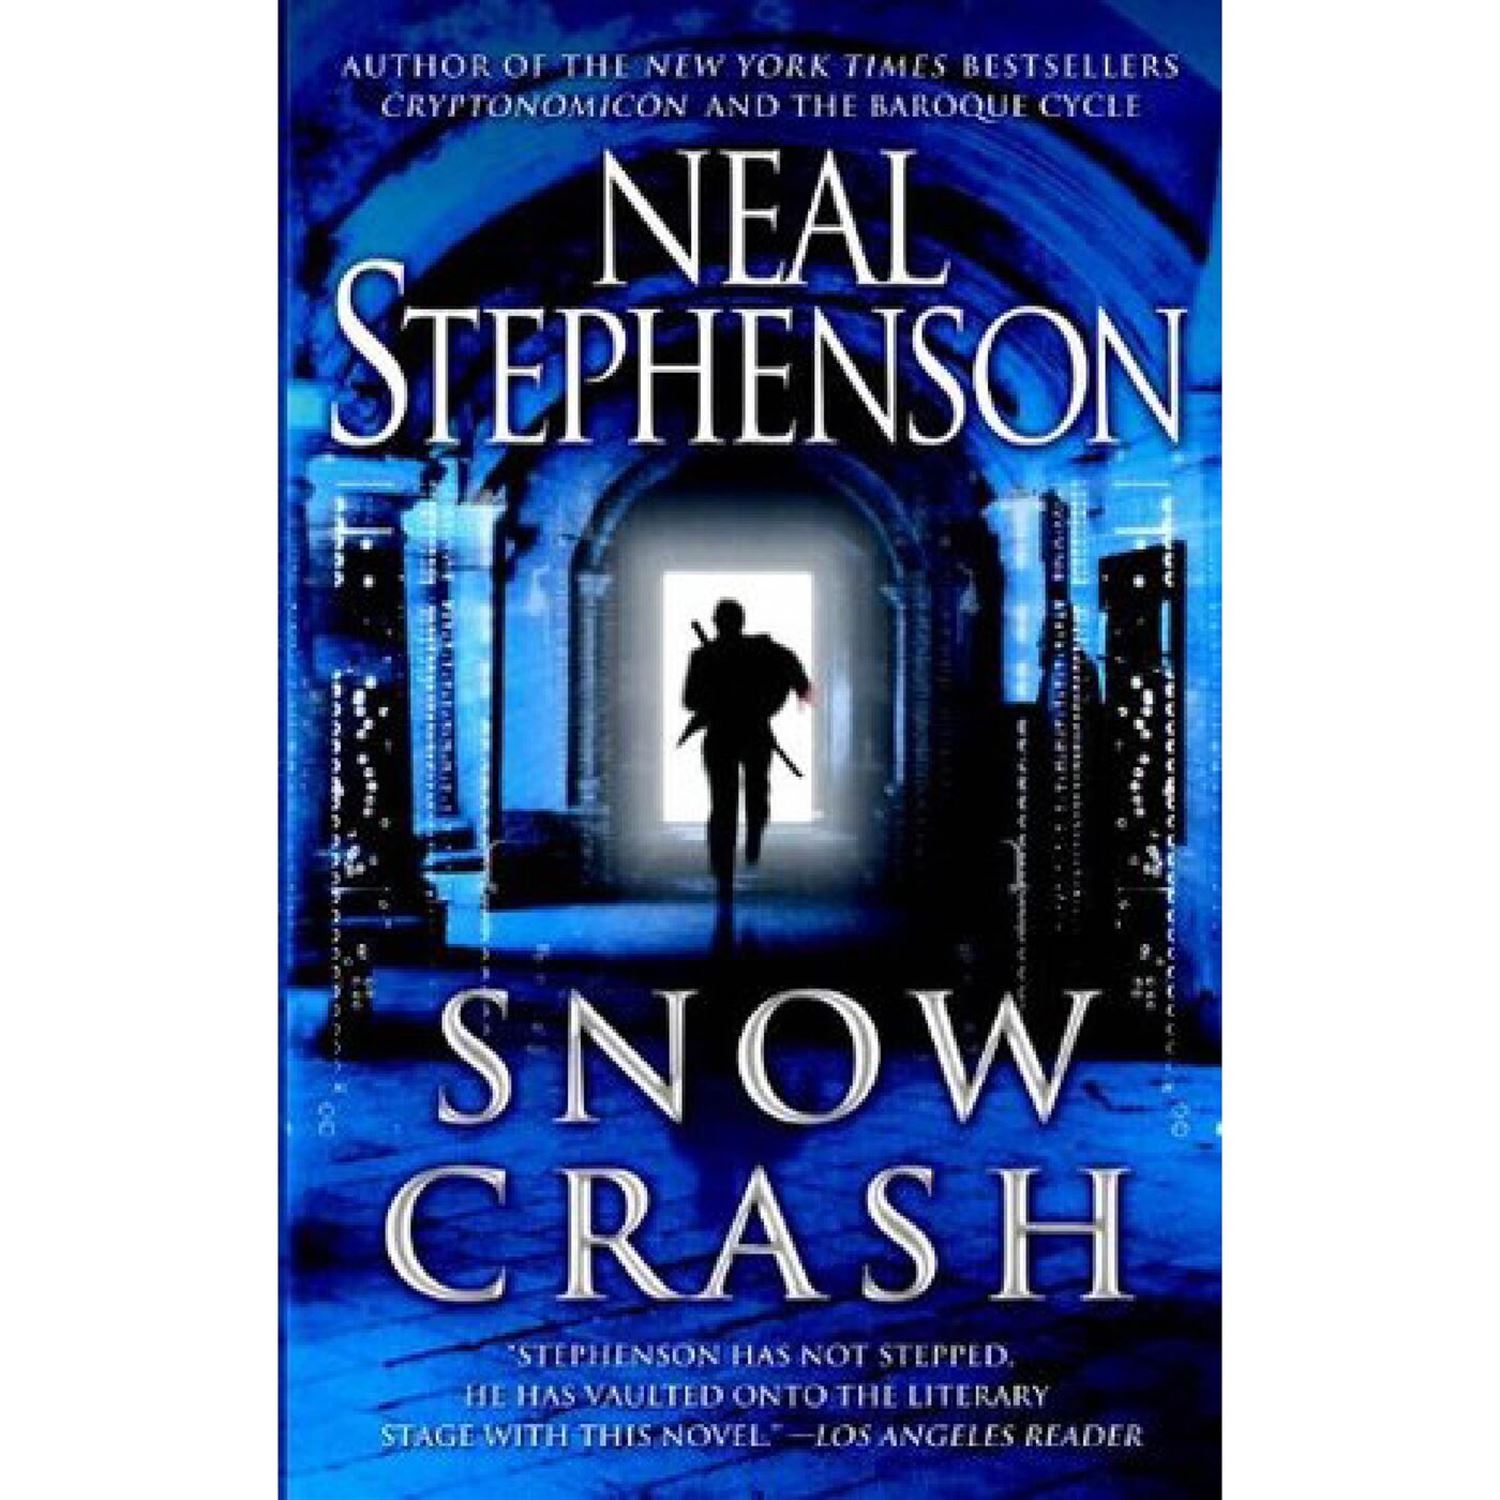 Snow crash and wise pacing